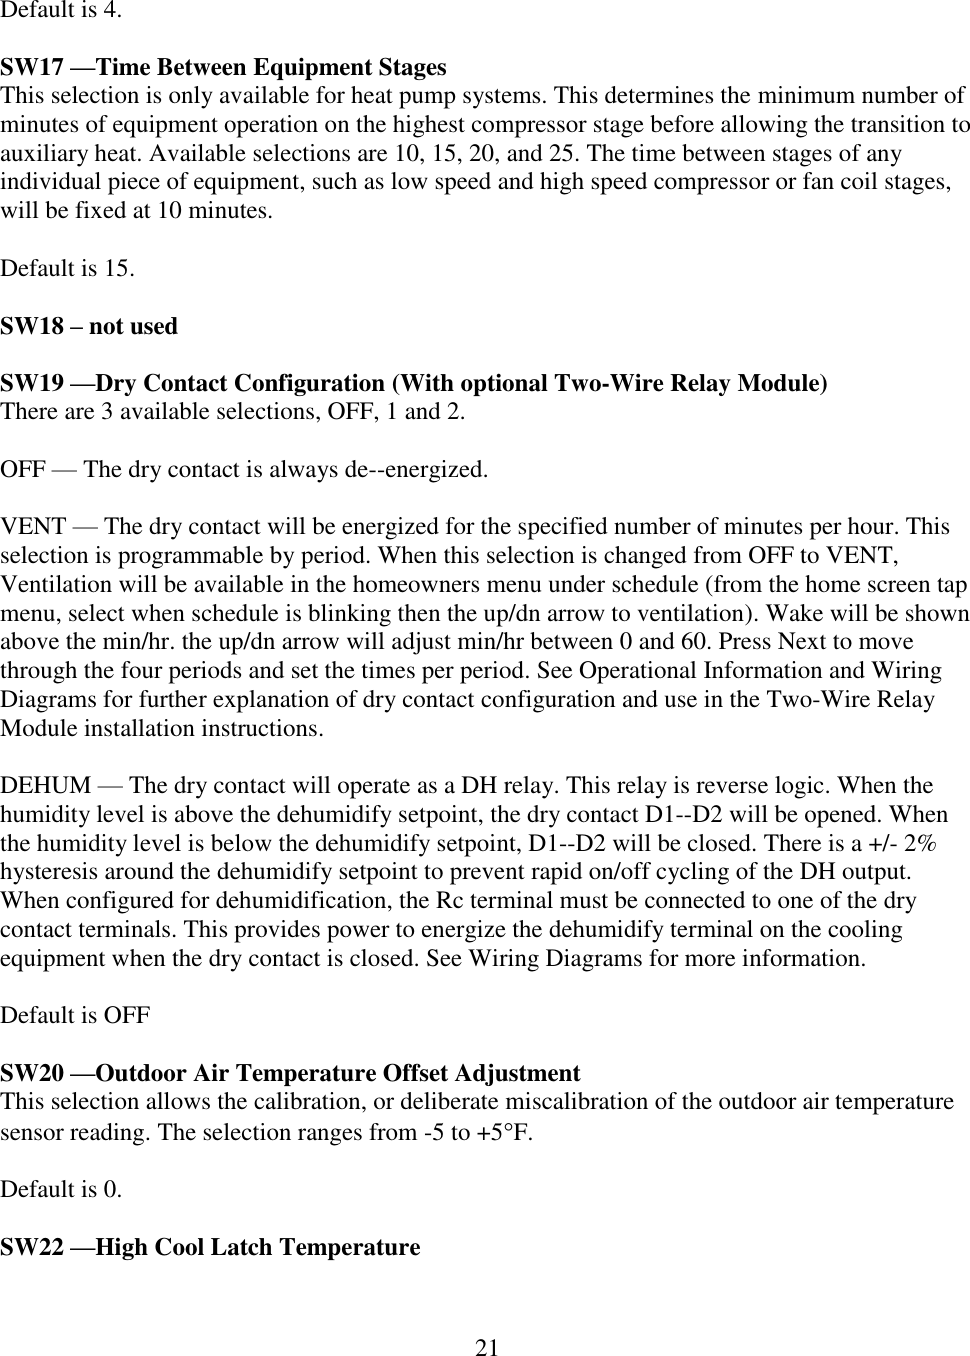 21   Default is 4.  SW17 —Time Between Equipment Stages This selection is only available for heat pump systems. This determines the minimum number of minutes of equipment operation on the highest compressor stage before allowing the transition to auxiliary heat. Available selections are 10, 15, 20, and 25. The time between stages of any individual piece of equipment, such as low speed and high speed compressor or fan coil stages, will be fixed at 10 minutes.  Default is 15.  SW18 – not used  SW19 —Dry Contact Configuration (With optional Two-Wire Relay Module) There are 3 available selections, OFF, 1 and 2.  OFF — The dry contact is always de--energized.  VENT — The dry contact will be energized for the specified number of minutes per hour. This selection is programmable by period. When this selection is changed from OFF to VENT, Ventilation will be available in the homeowners menu under schedule (from the home screen tap menu, select when schedule is blinking then the up/dn arrow to ventilation). Wake will be shown above the min/hr. the up/dn arrow will adjust min/hr between 0 and 60. Press Next to move through the four periods and set the times per period. See Operational Information and Wiring Diagrams for further explanation of dry contact configuration and use in the Two-Wire Relay Module installation instructions.   DEHUM — The dry contact will operate as a DH relay. This relay is reverse logic. When the humidity level is above the dehumidify setpoint, the dry contact D1--D2 will be opened. When the humidity level is below the dehumidify setpoint, D1--D2 will be closed. There is a +/- 2% hysteresis around the dehumidify setpoint to prevent rapid on/off cycling of the DH output. When configured for dehumidification, the Rc terminal must be connected to one of the dry contact terminals. This provides power to energize the dehumidify terminal on the cooling equipment when the dry contact is closed. See Wiring Diagrams for more information.  Default is OFF  SW20 —Outdoor Air Temperature Offset Adjustment This selection allows the calibration, or deliberate miscalibration of the outdoor air temperature sensor reading. The selection ranges from -5 to +5F.  Default is 0.  SW22 —High Cool Latch Temperature   